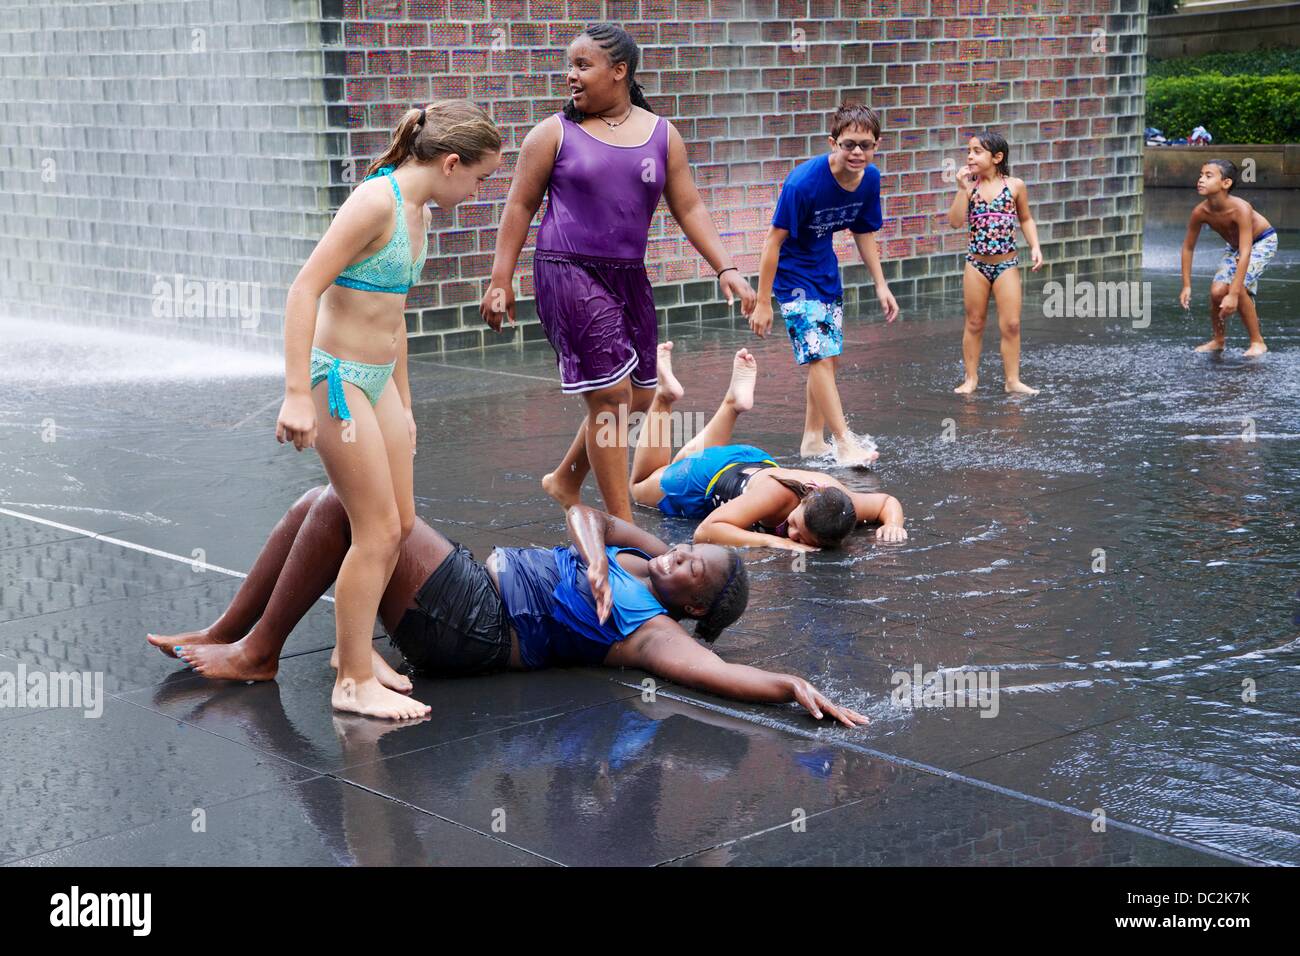 Chicago, Illinois, USA. 7th August 2013. Crown Fountain in Millennium Park in Chicago, USA, provides cool fun for children on a hot, muggy day. Credit:  Todd Bannor/Alamy Live News Stock Photo